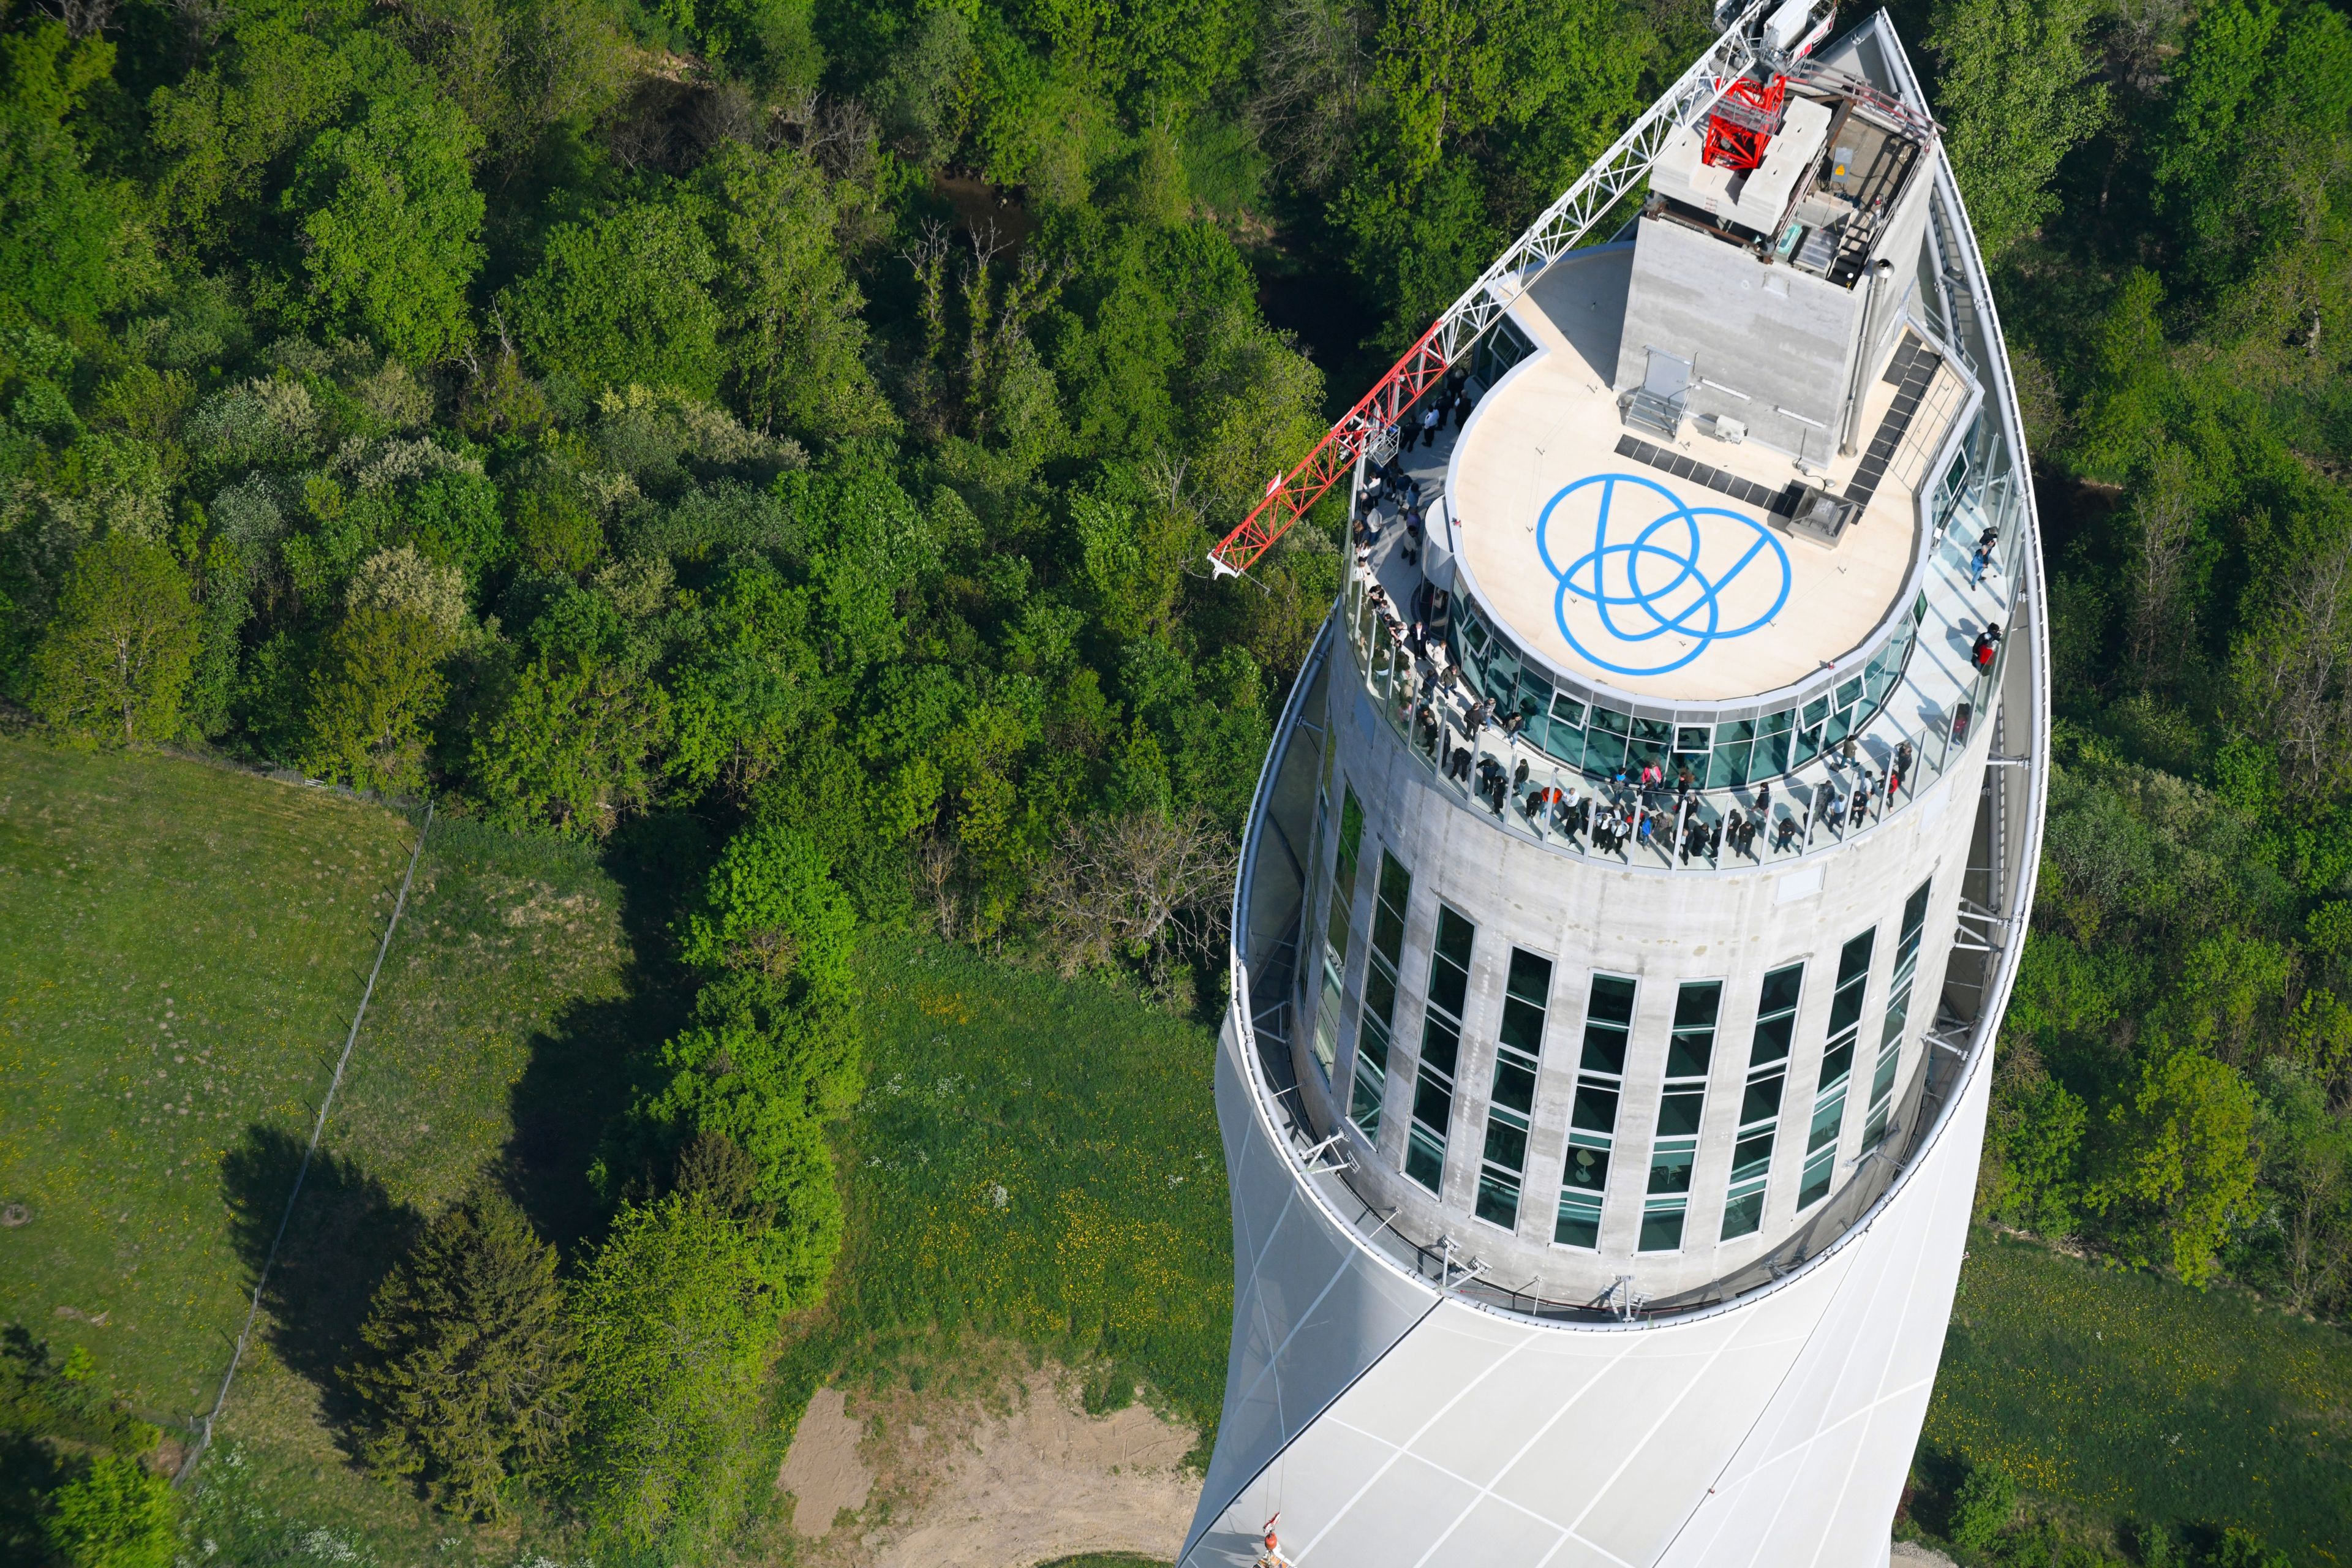 Sika roof graphics applied on Thyssenkrupp elevator test tower in Rottweil, Germany